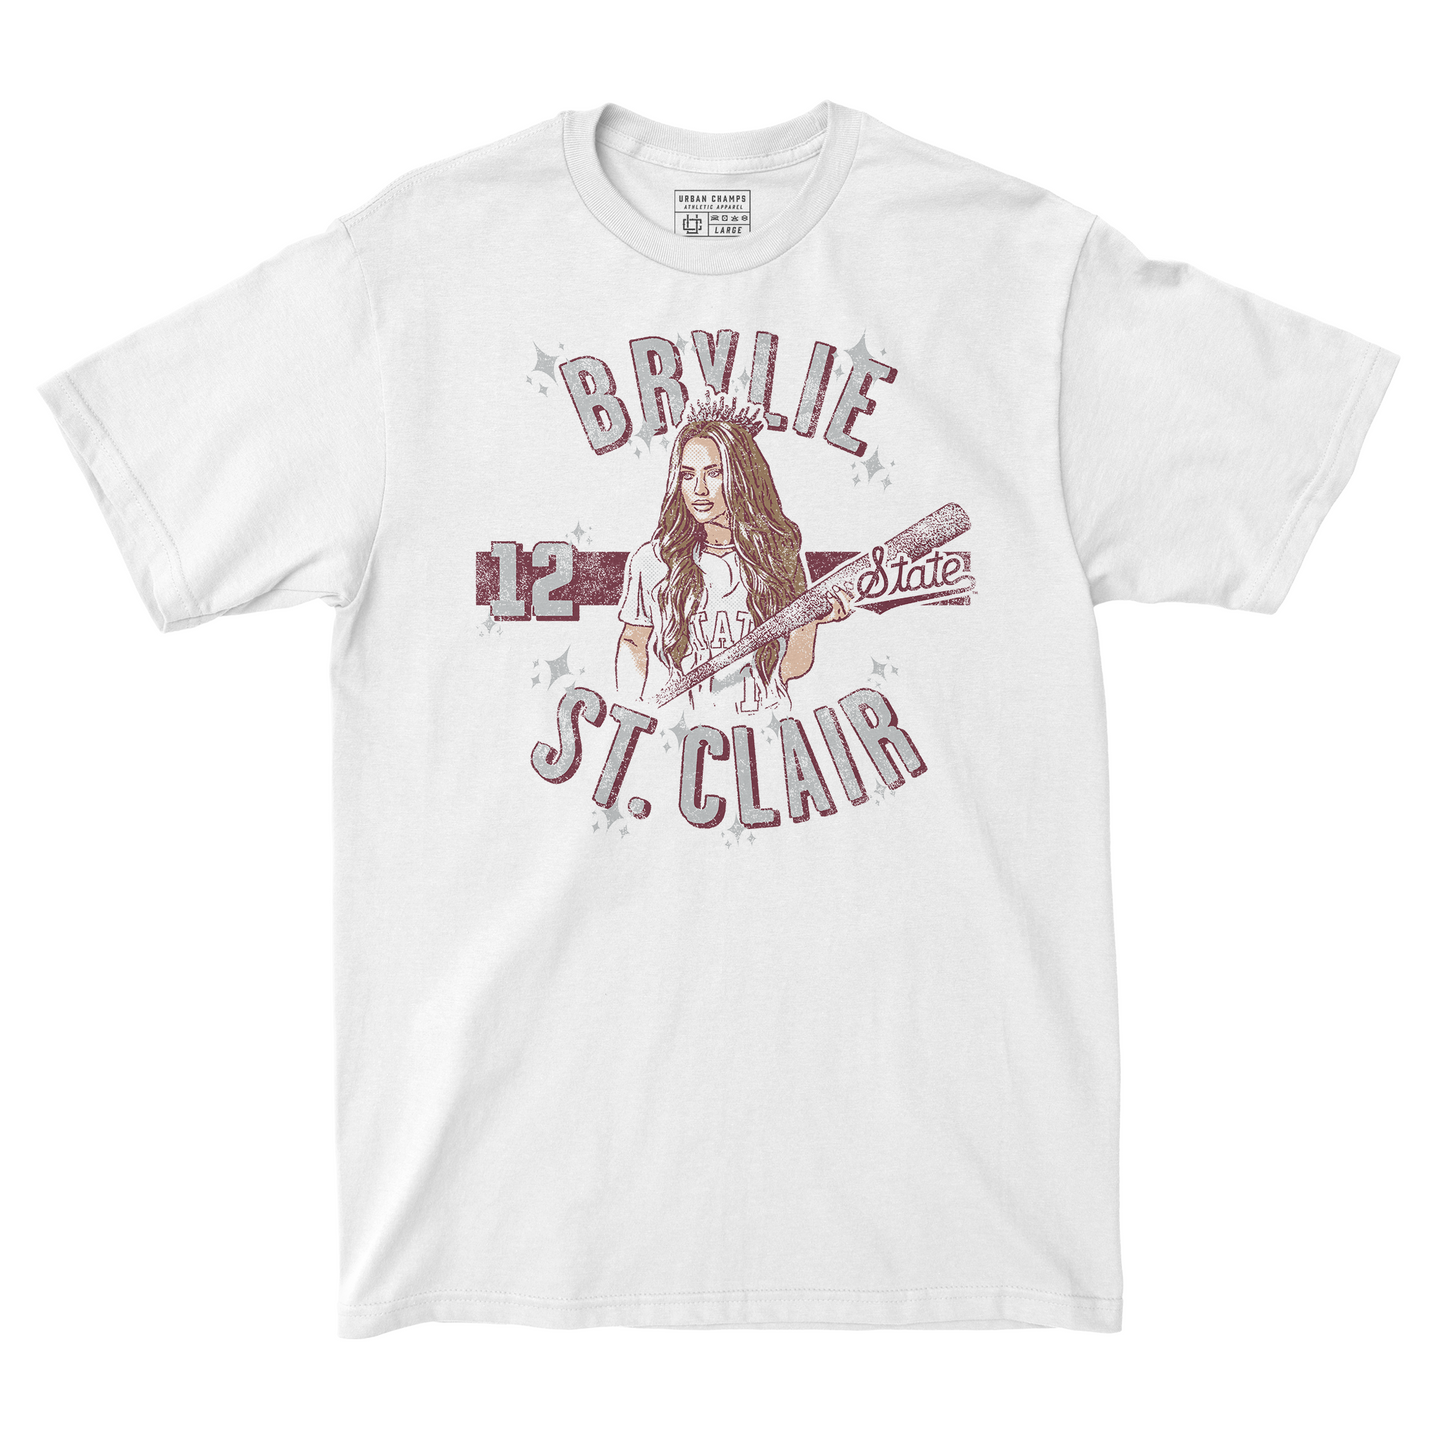 EXCLUSIVE RELEASE: Brylie St. Clair White Tee